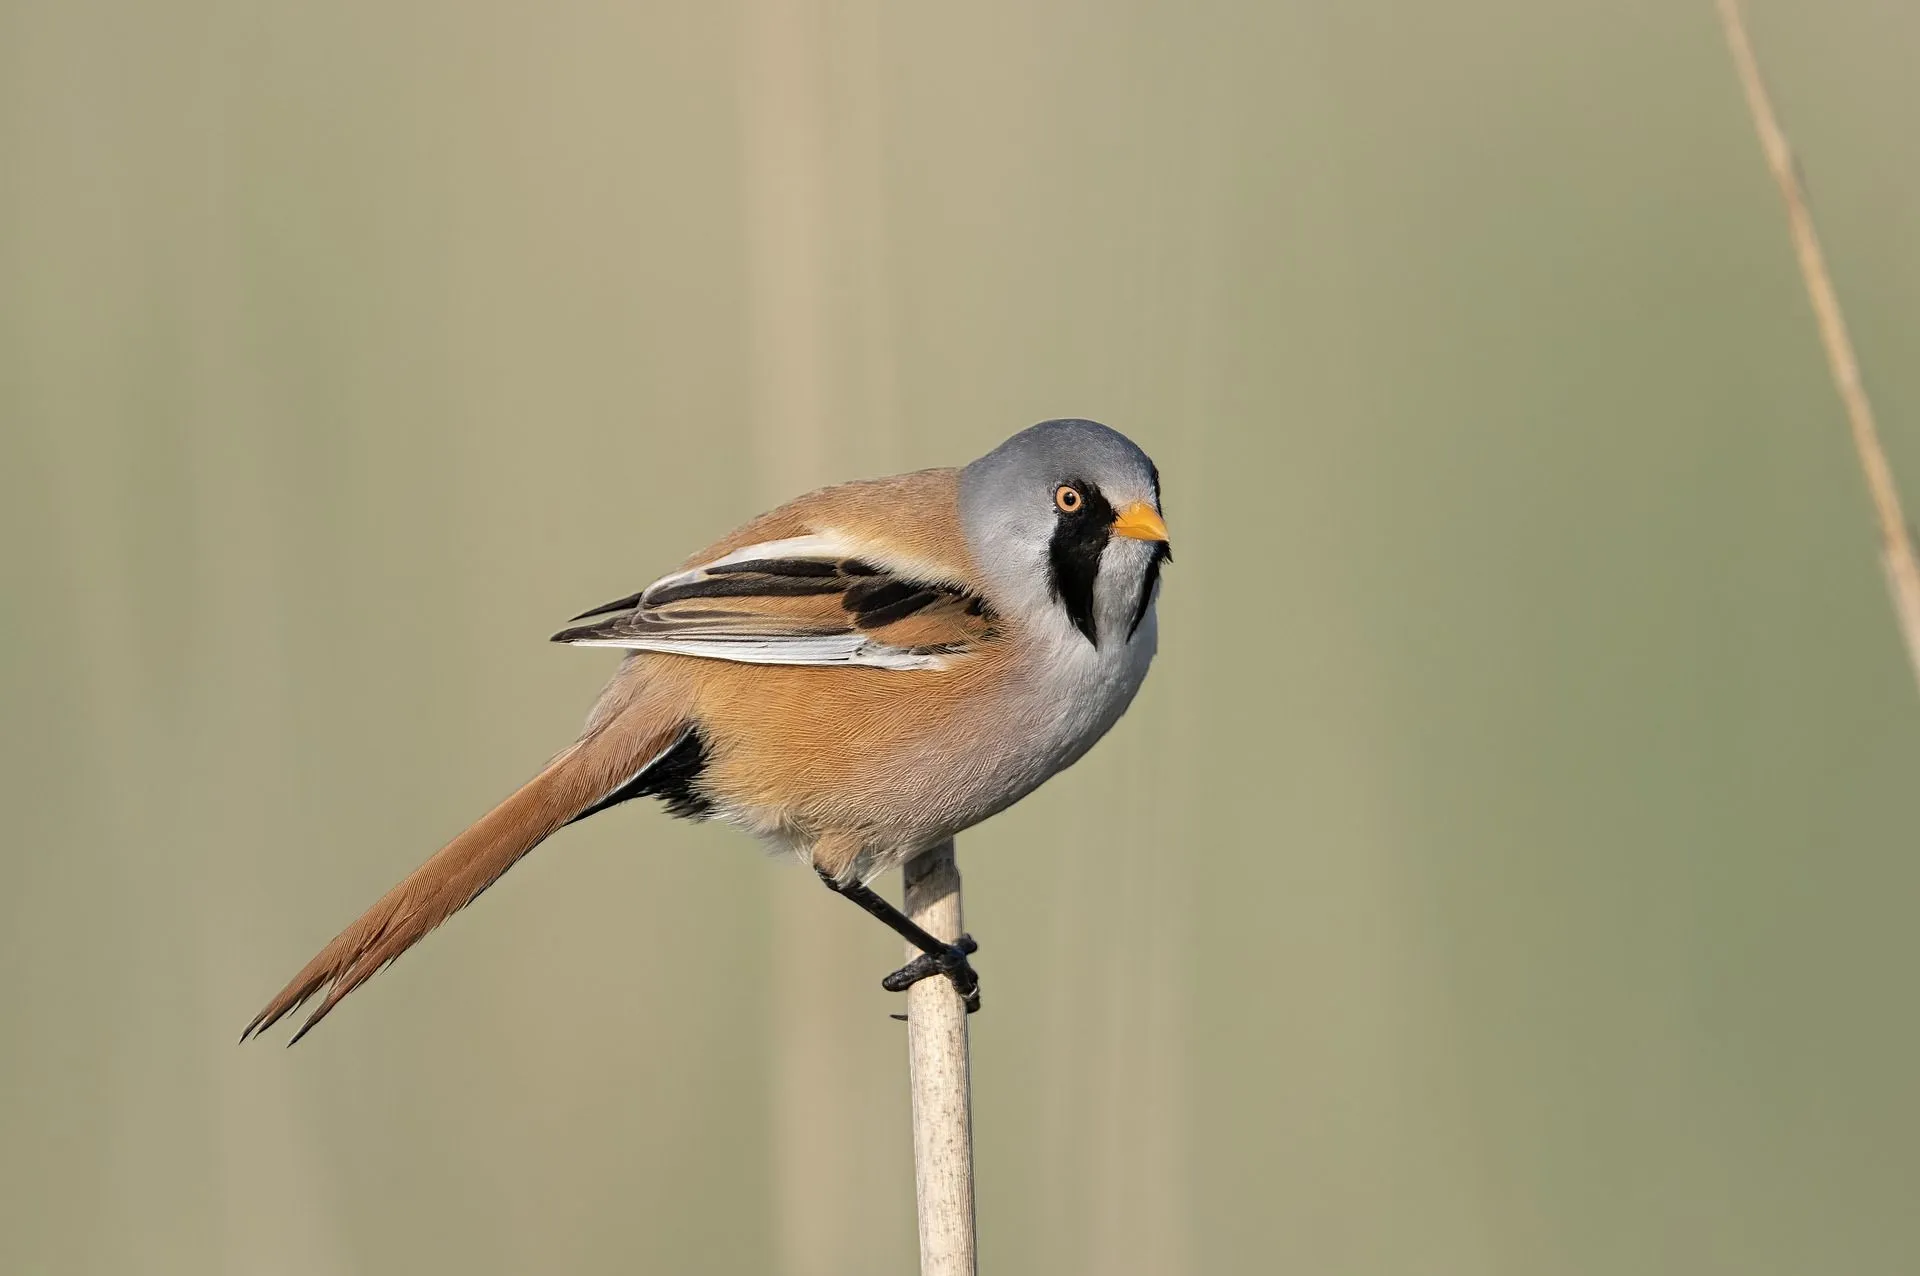 Bearded reedling facts are about birds with black mustaches.